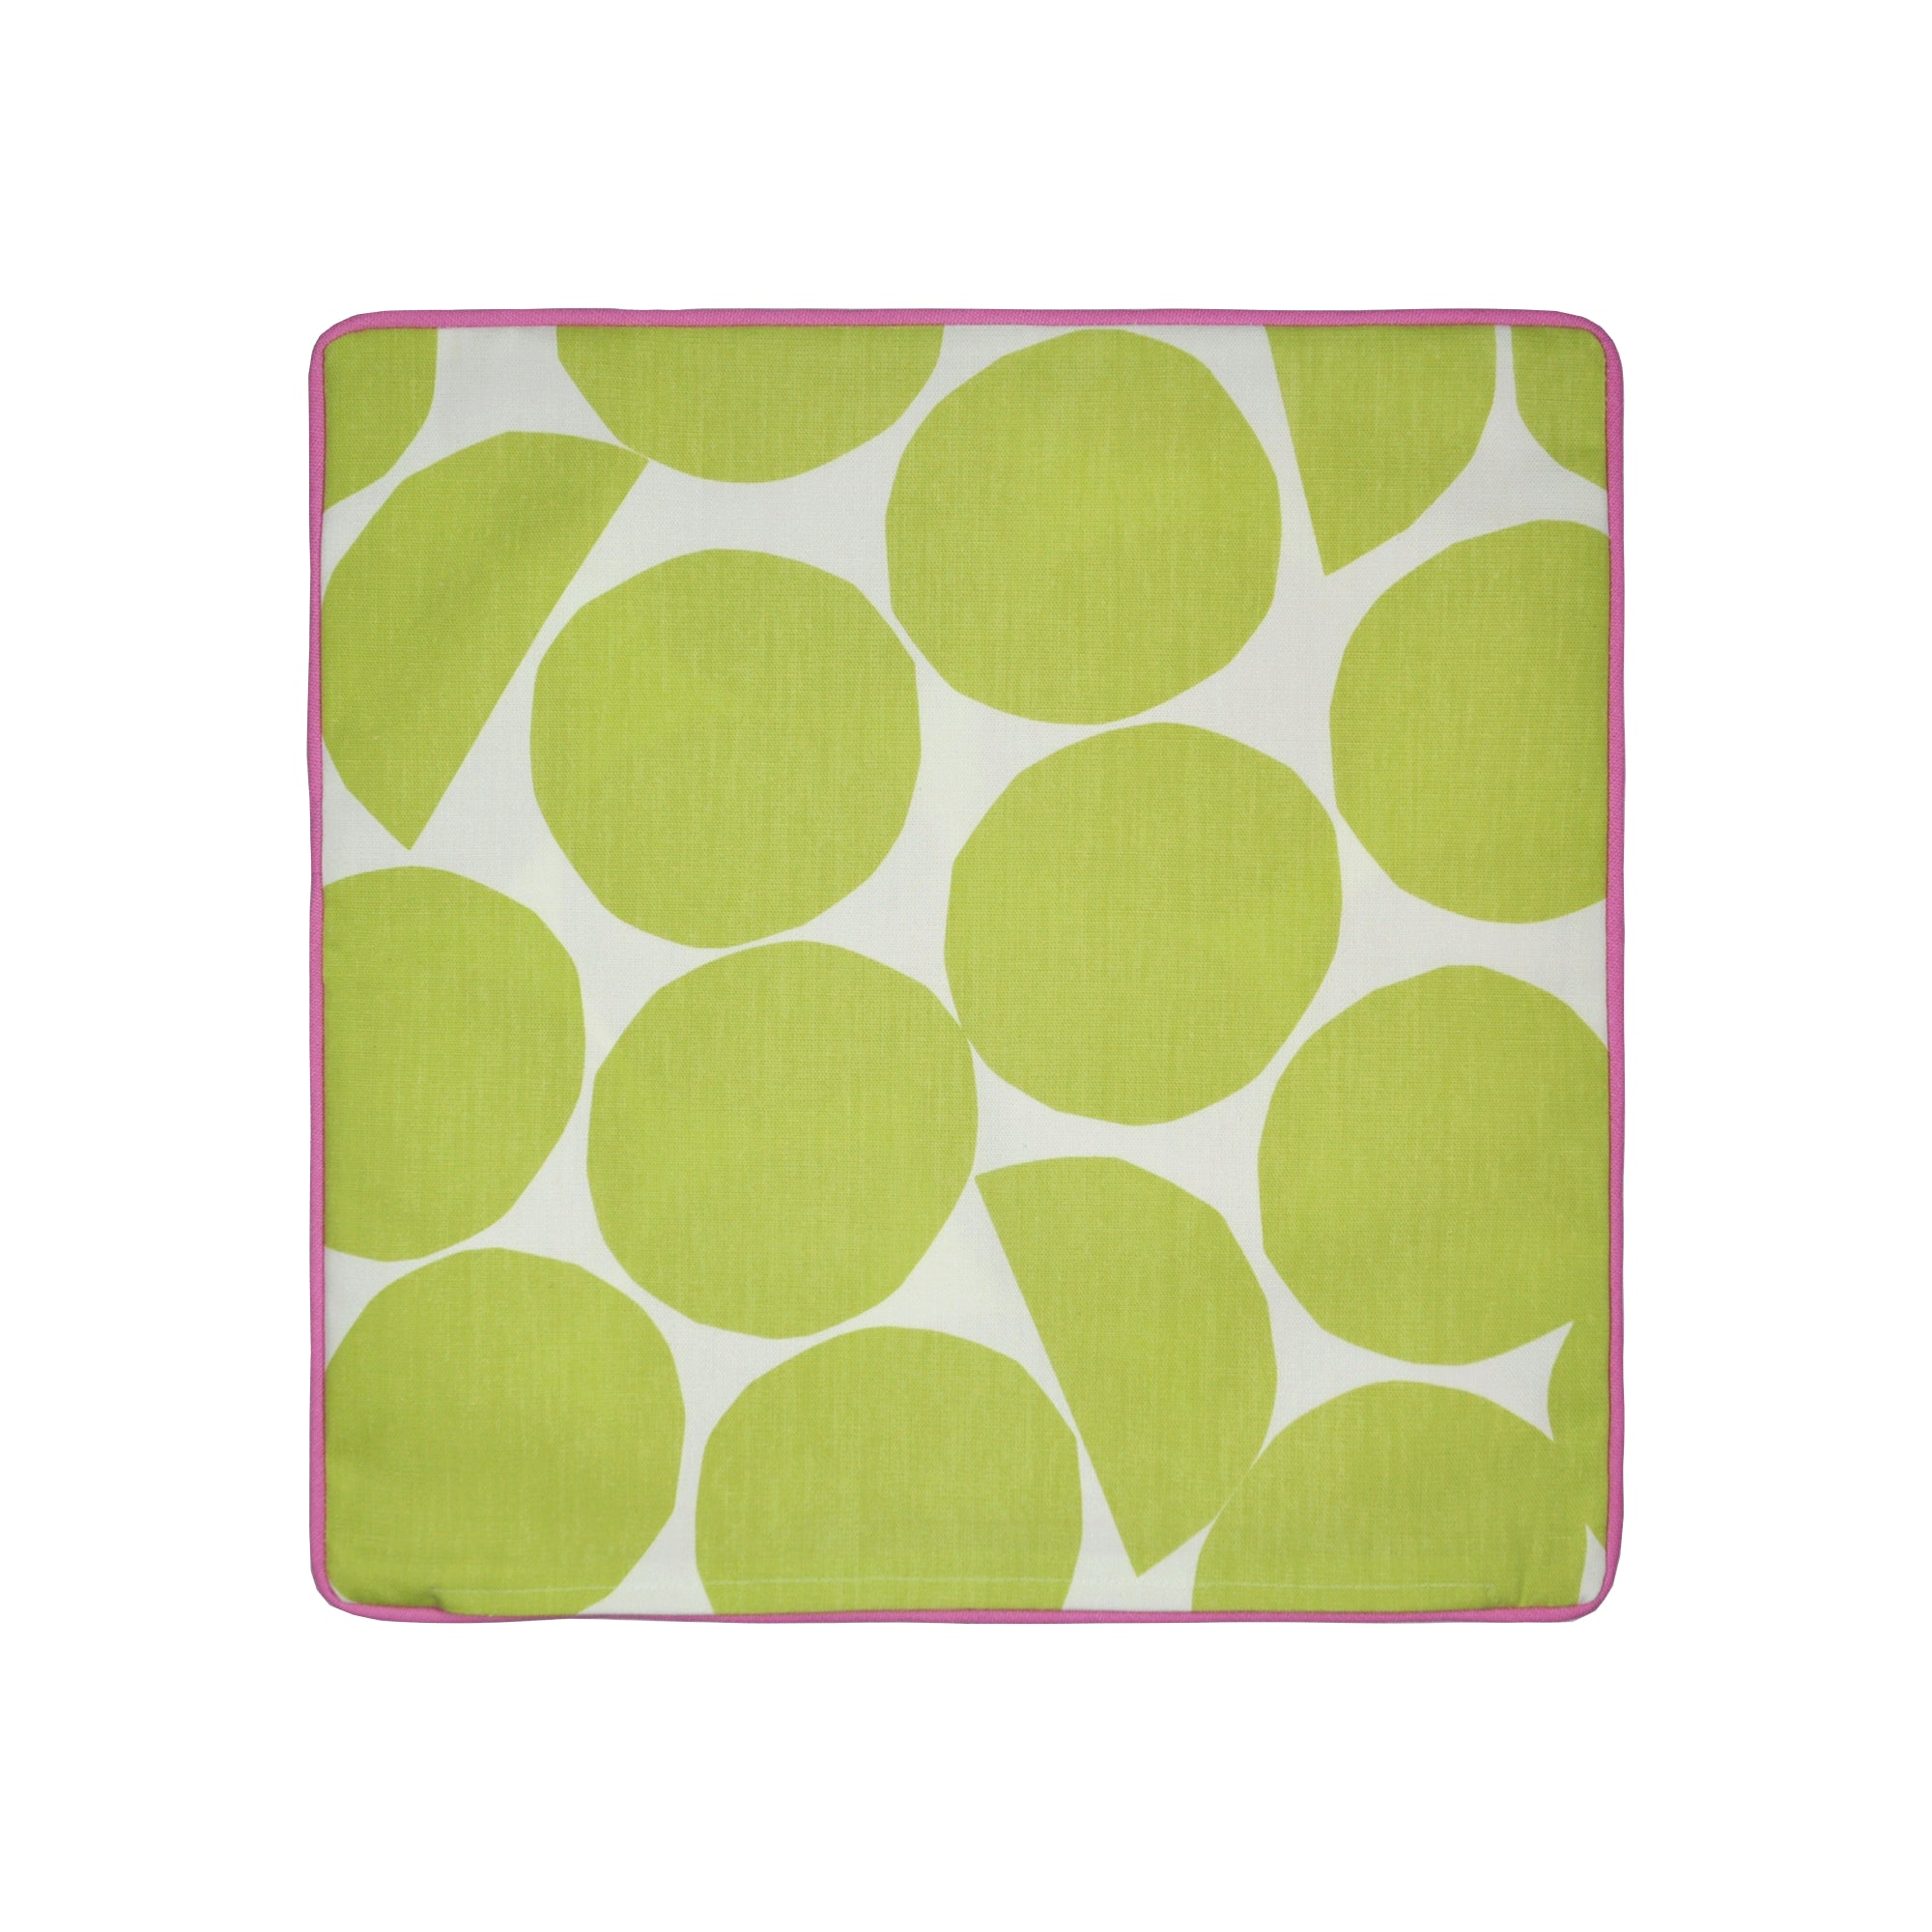 Filled Outdoor Cushion Ingo by Fusion in Pink/Green